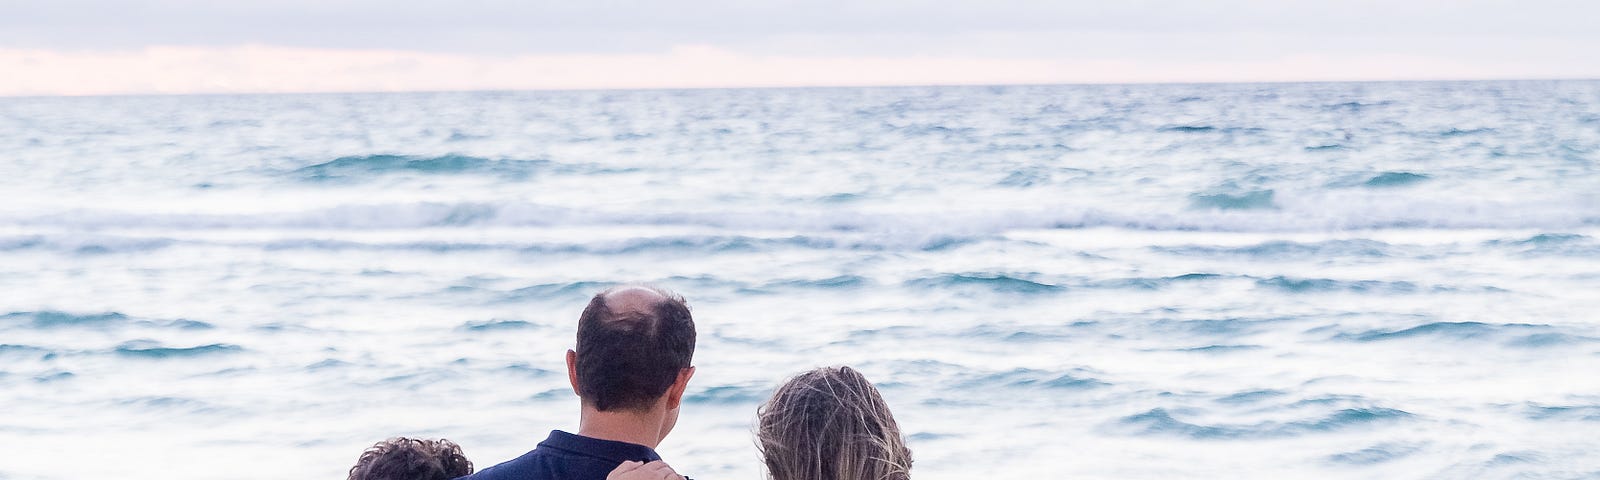 Rear view of family with their arms around each other by the beach